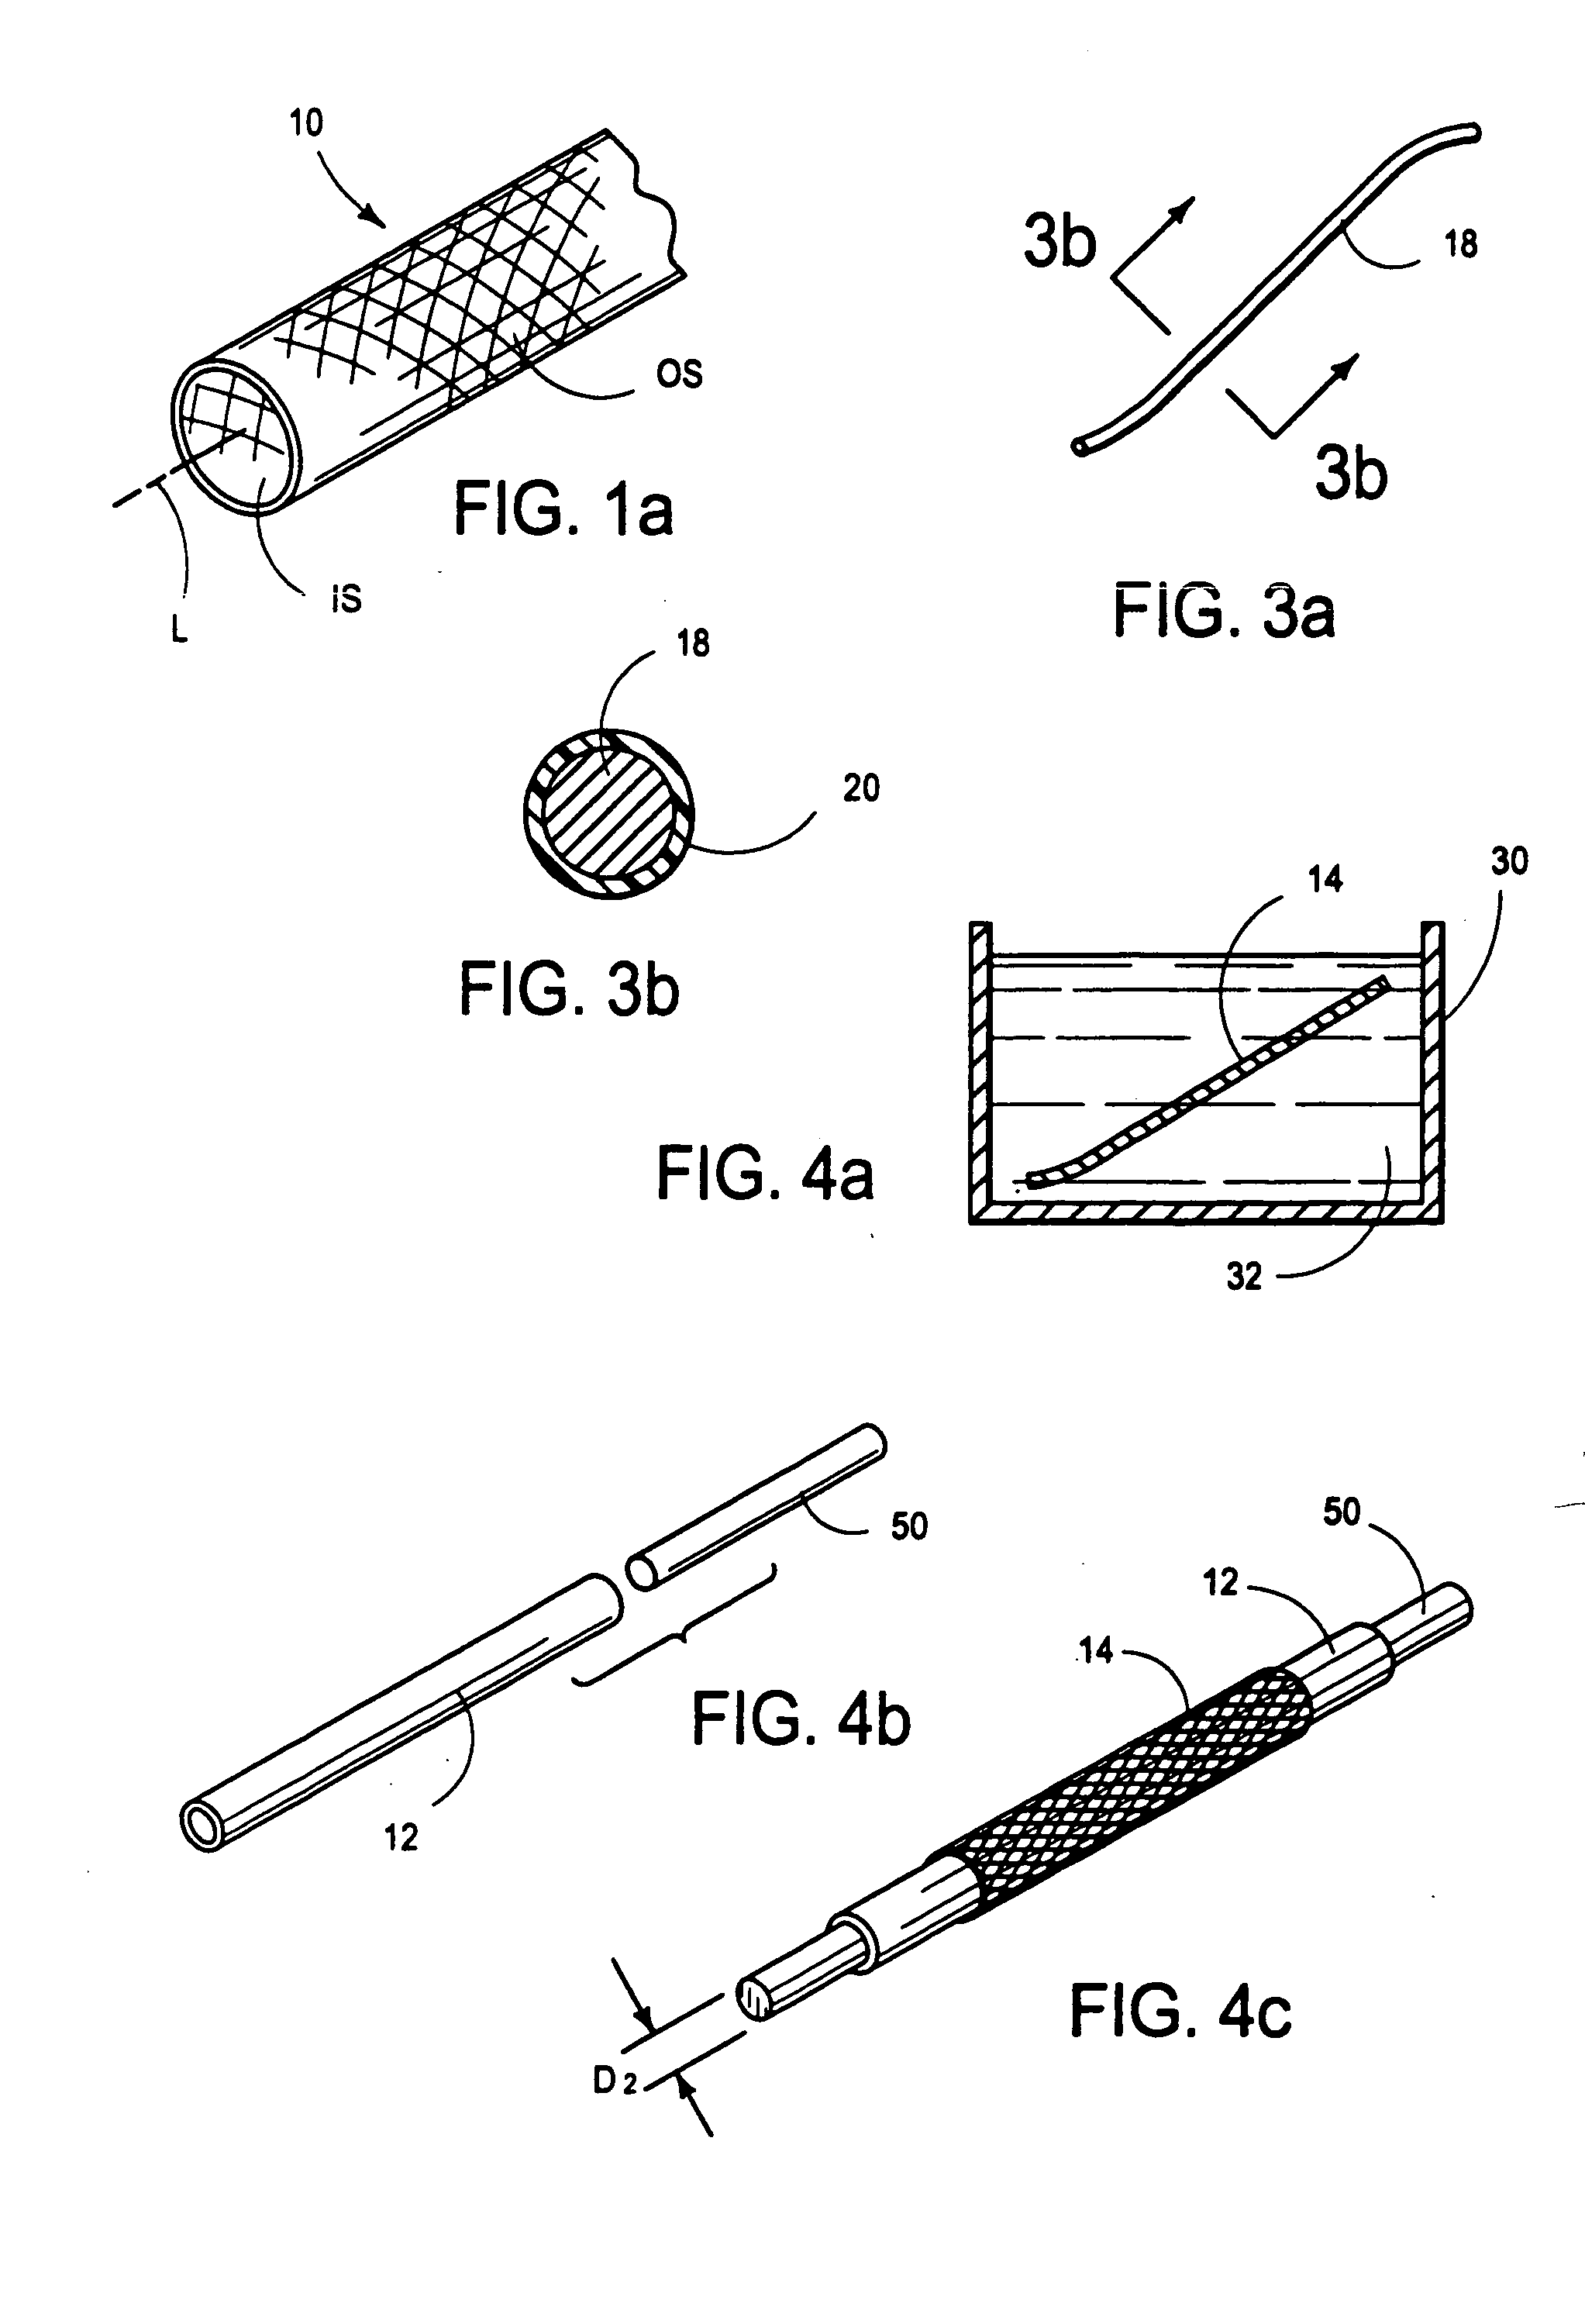 Polymer coated stents